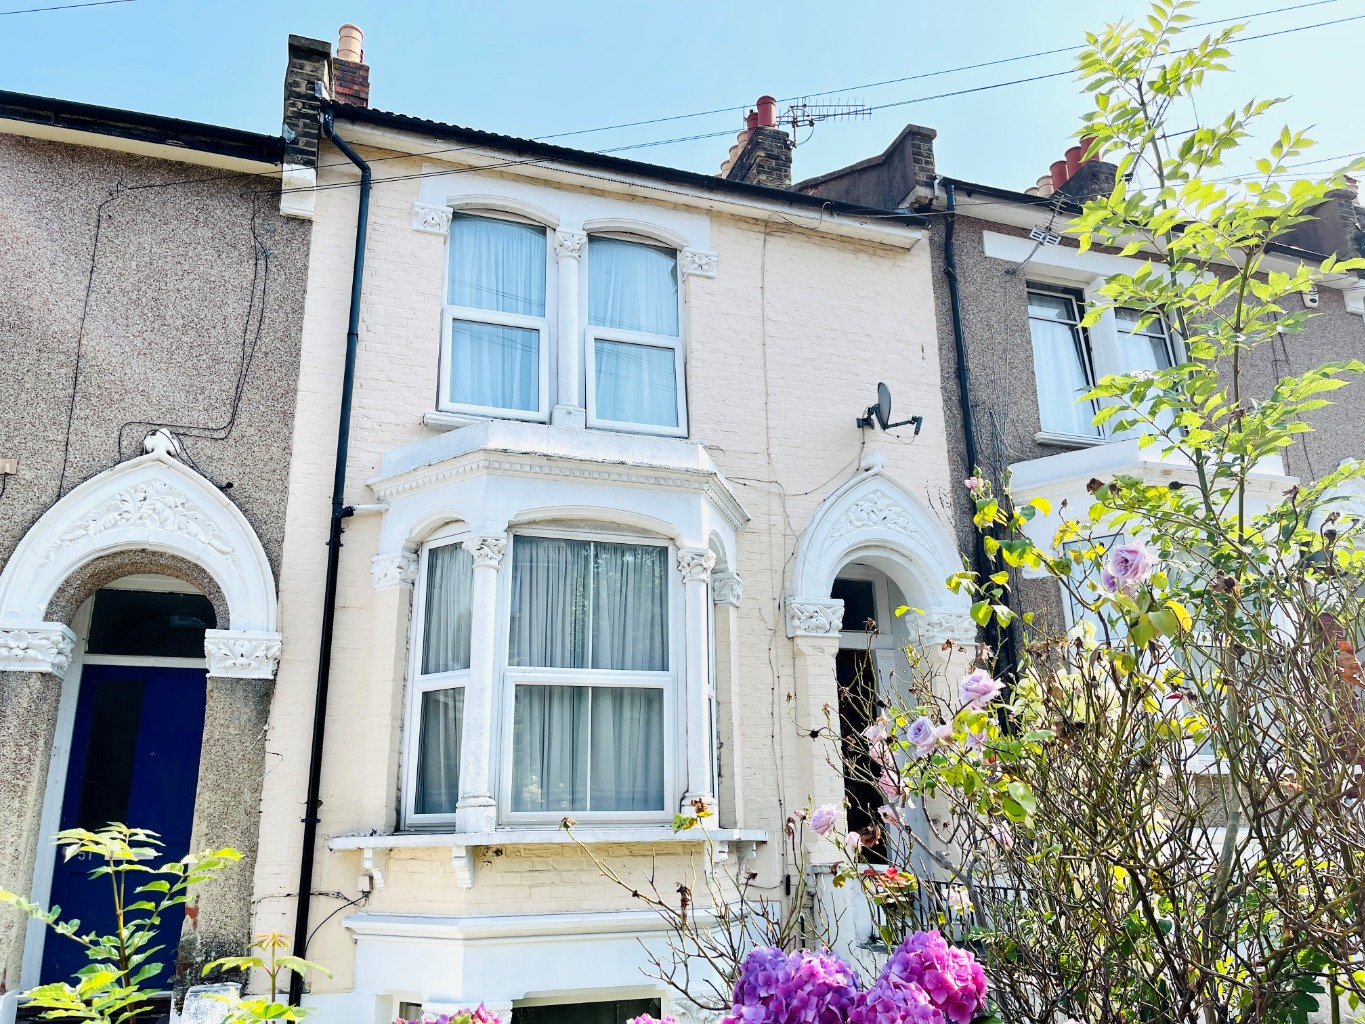 * FOUR BEDROOMED SPLIT LEVEL MAISONETTE * TWO RECEPTION ROOMS * GROUND FLOOR WET ROOM * FIRST FLOOR SHOWER ROOM * BONUS LOFT ROOM * OWN PRIVATE ENTRANCE * OWN PRIVATE GARDEN * BRAND NEW 999 YEAR LEASE * SHOOTERS HILL SLOPES LOCATION * SEE VIDEO WALKTHROUGH TOUR * GAS CENTRAL HEATING * PARTLY DOUBLE